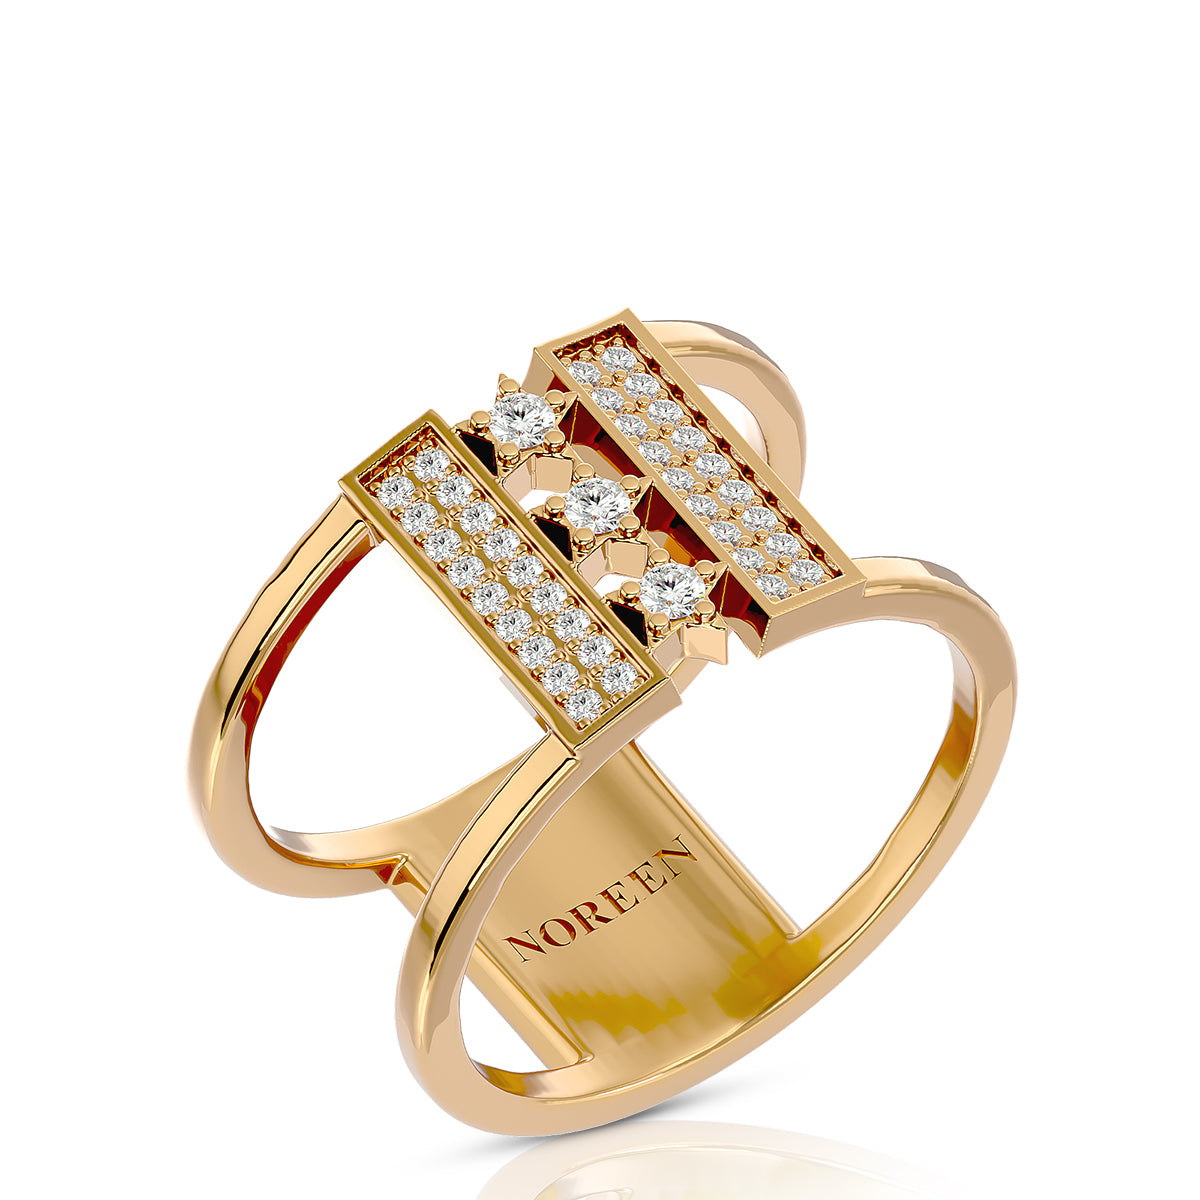 Empowerment Ring 18K Gold With Diamonds